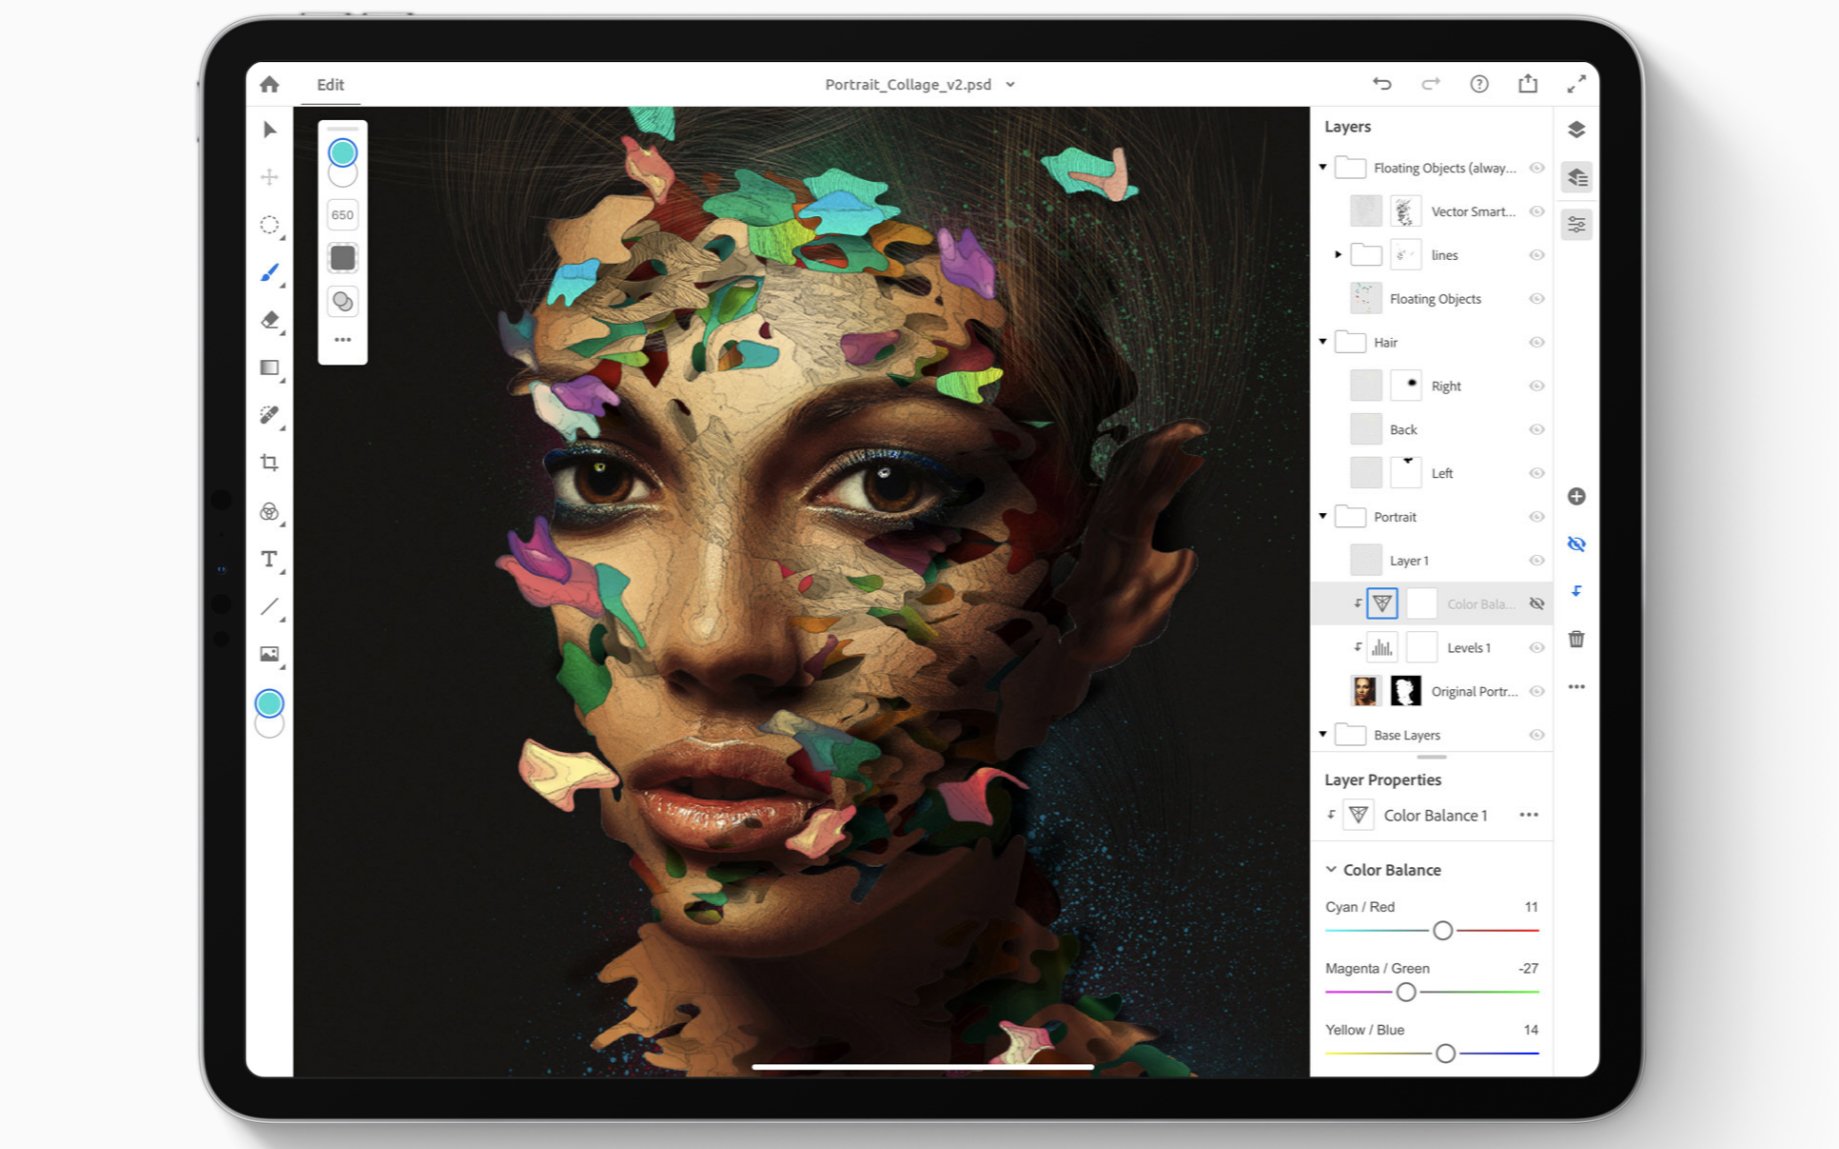 Full Photoshop for iPad is Missing Key Features, Say Beta Testers: Report